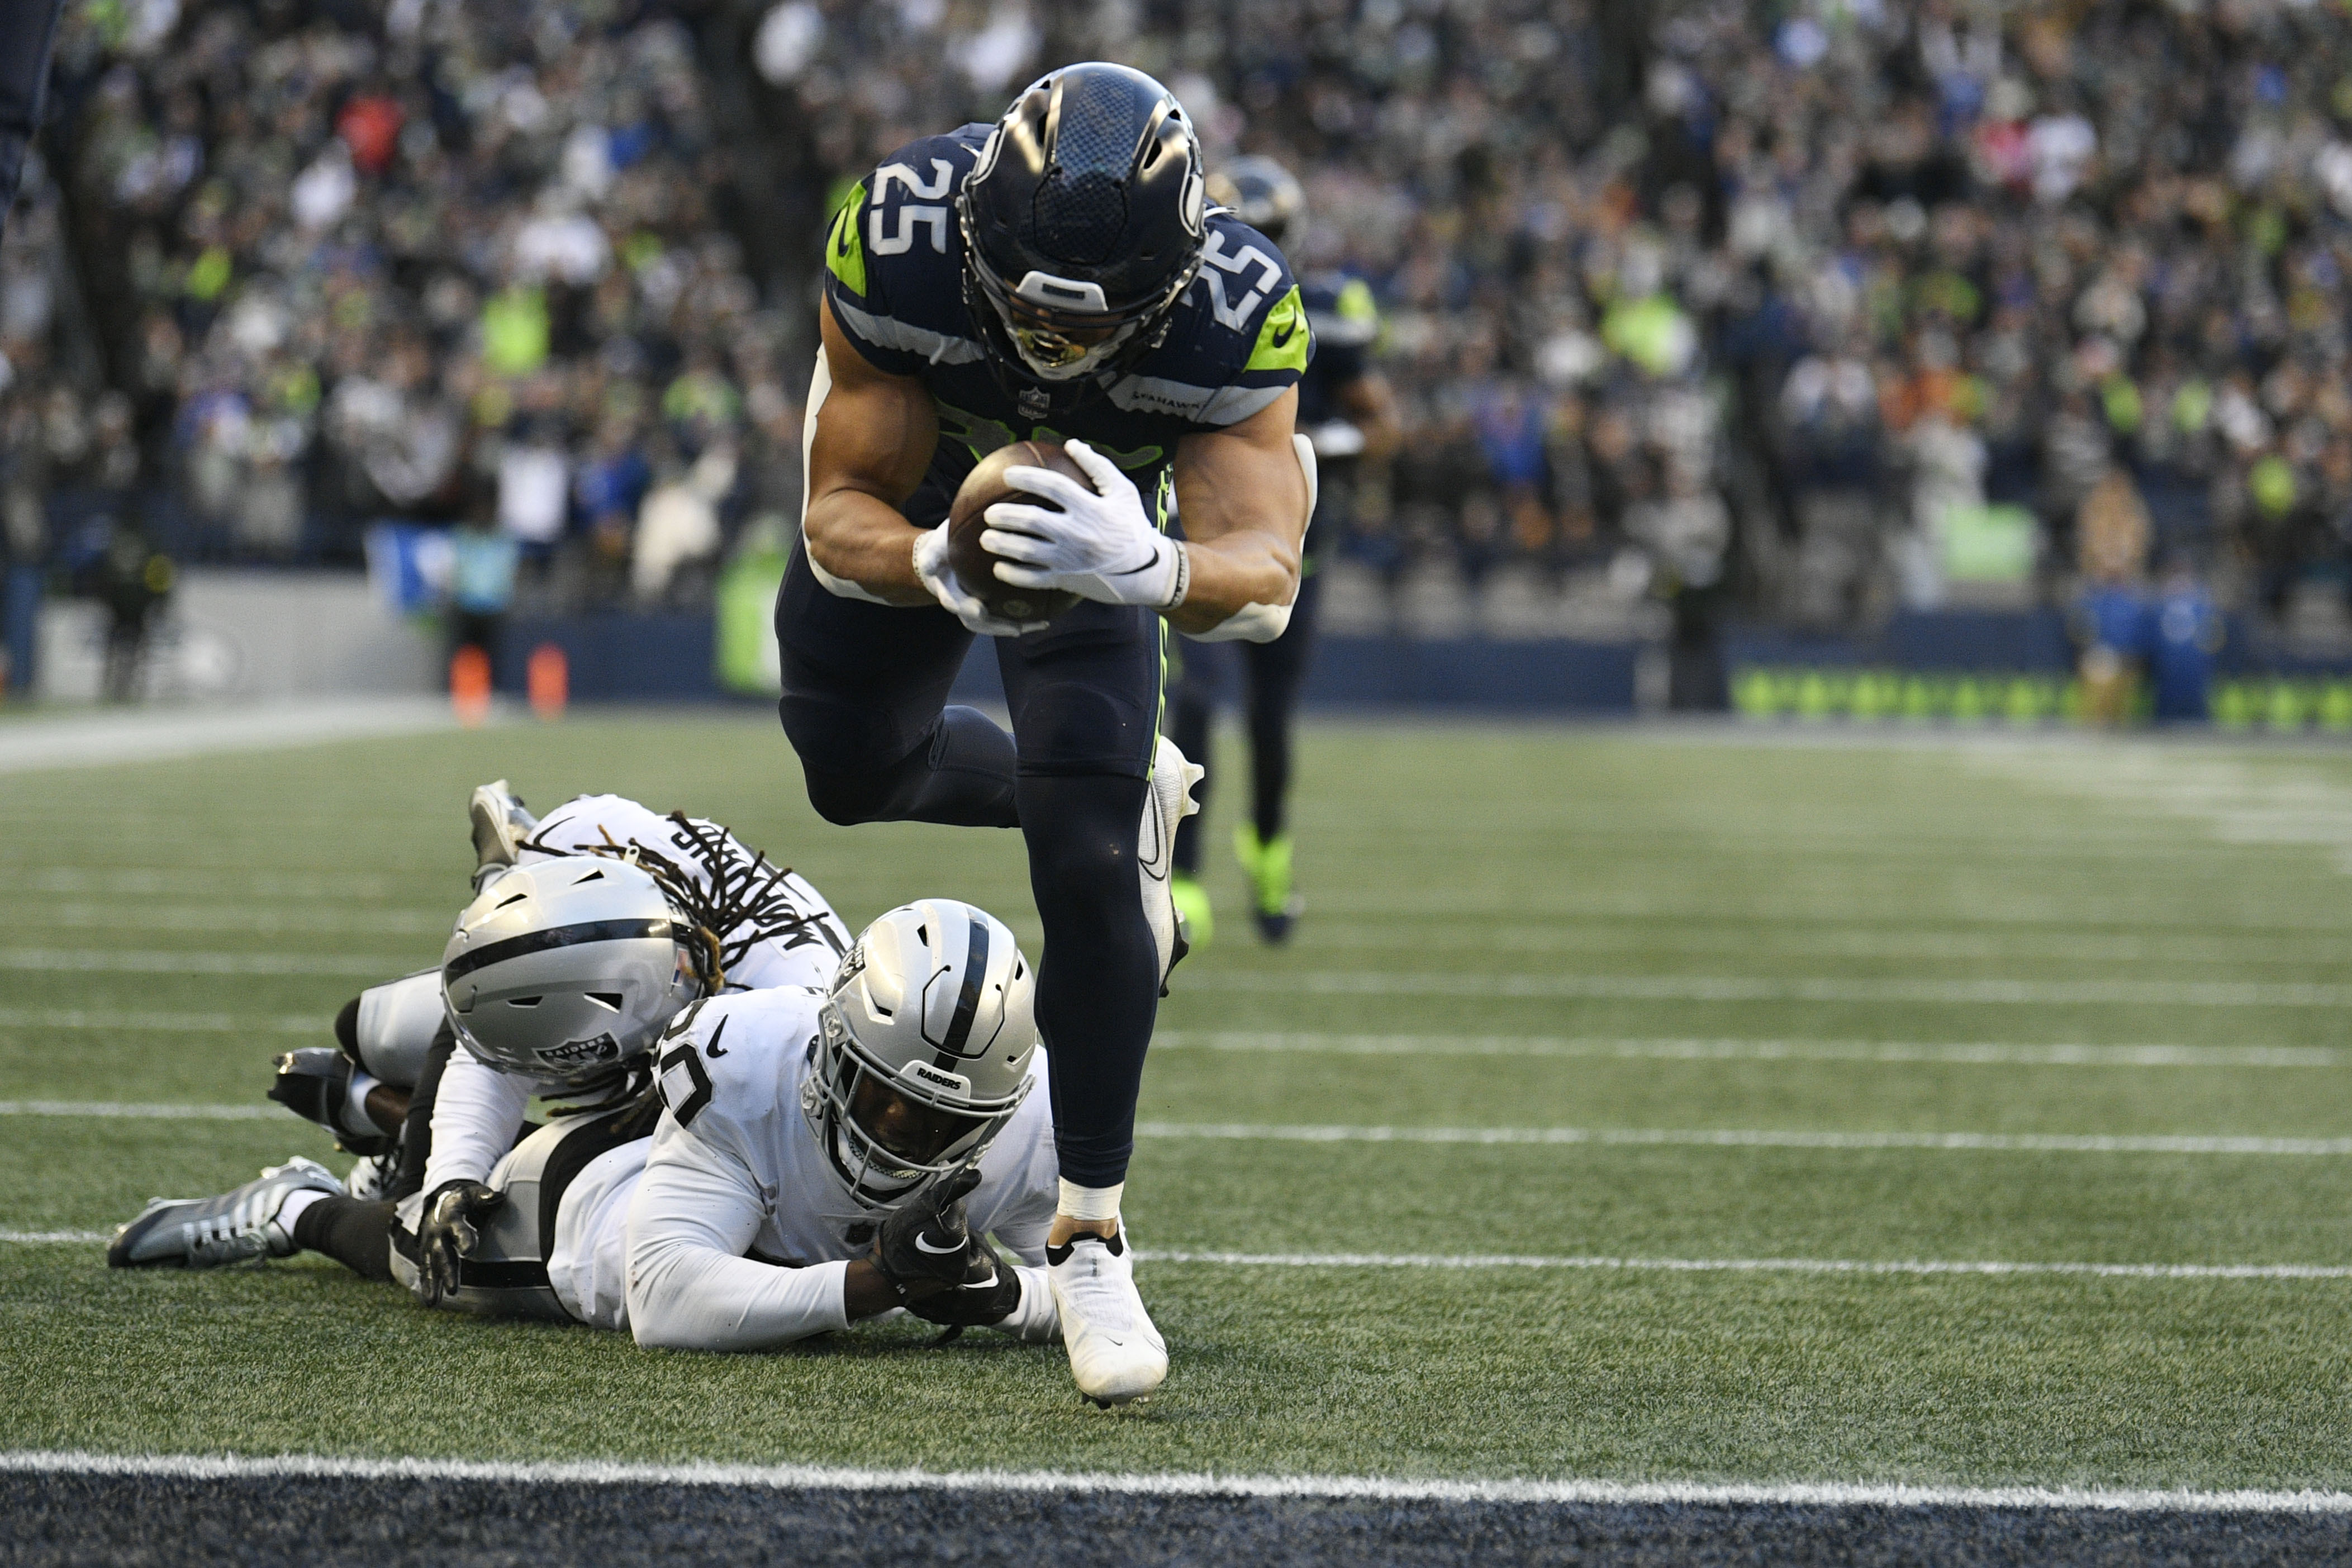 Jacobs caps huge day with TD in OT, Raiders beat Seahawks - ABC7 Los Angeles